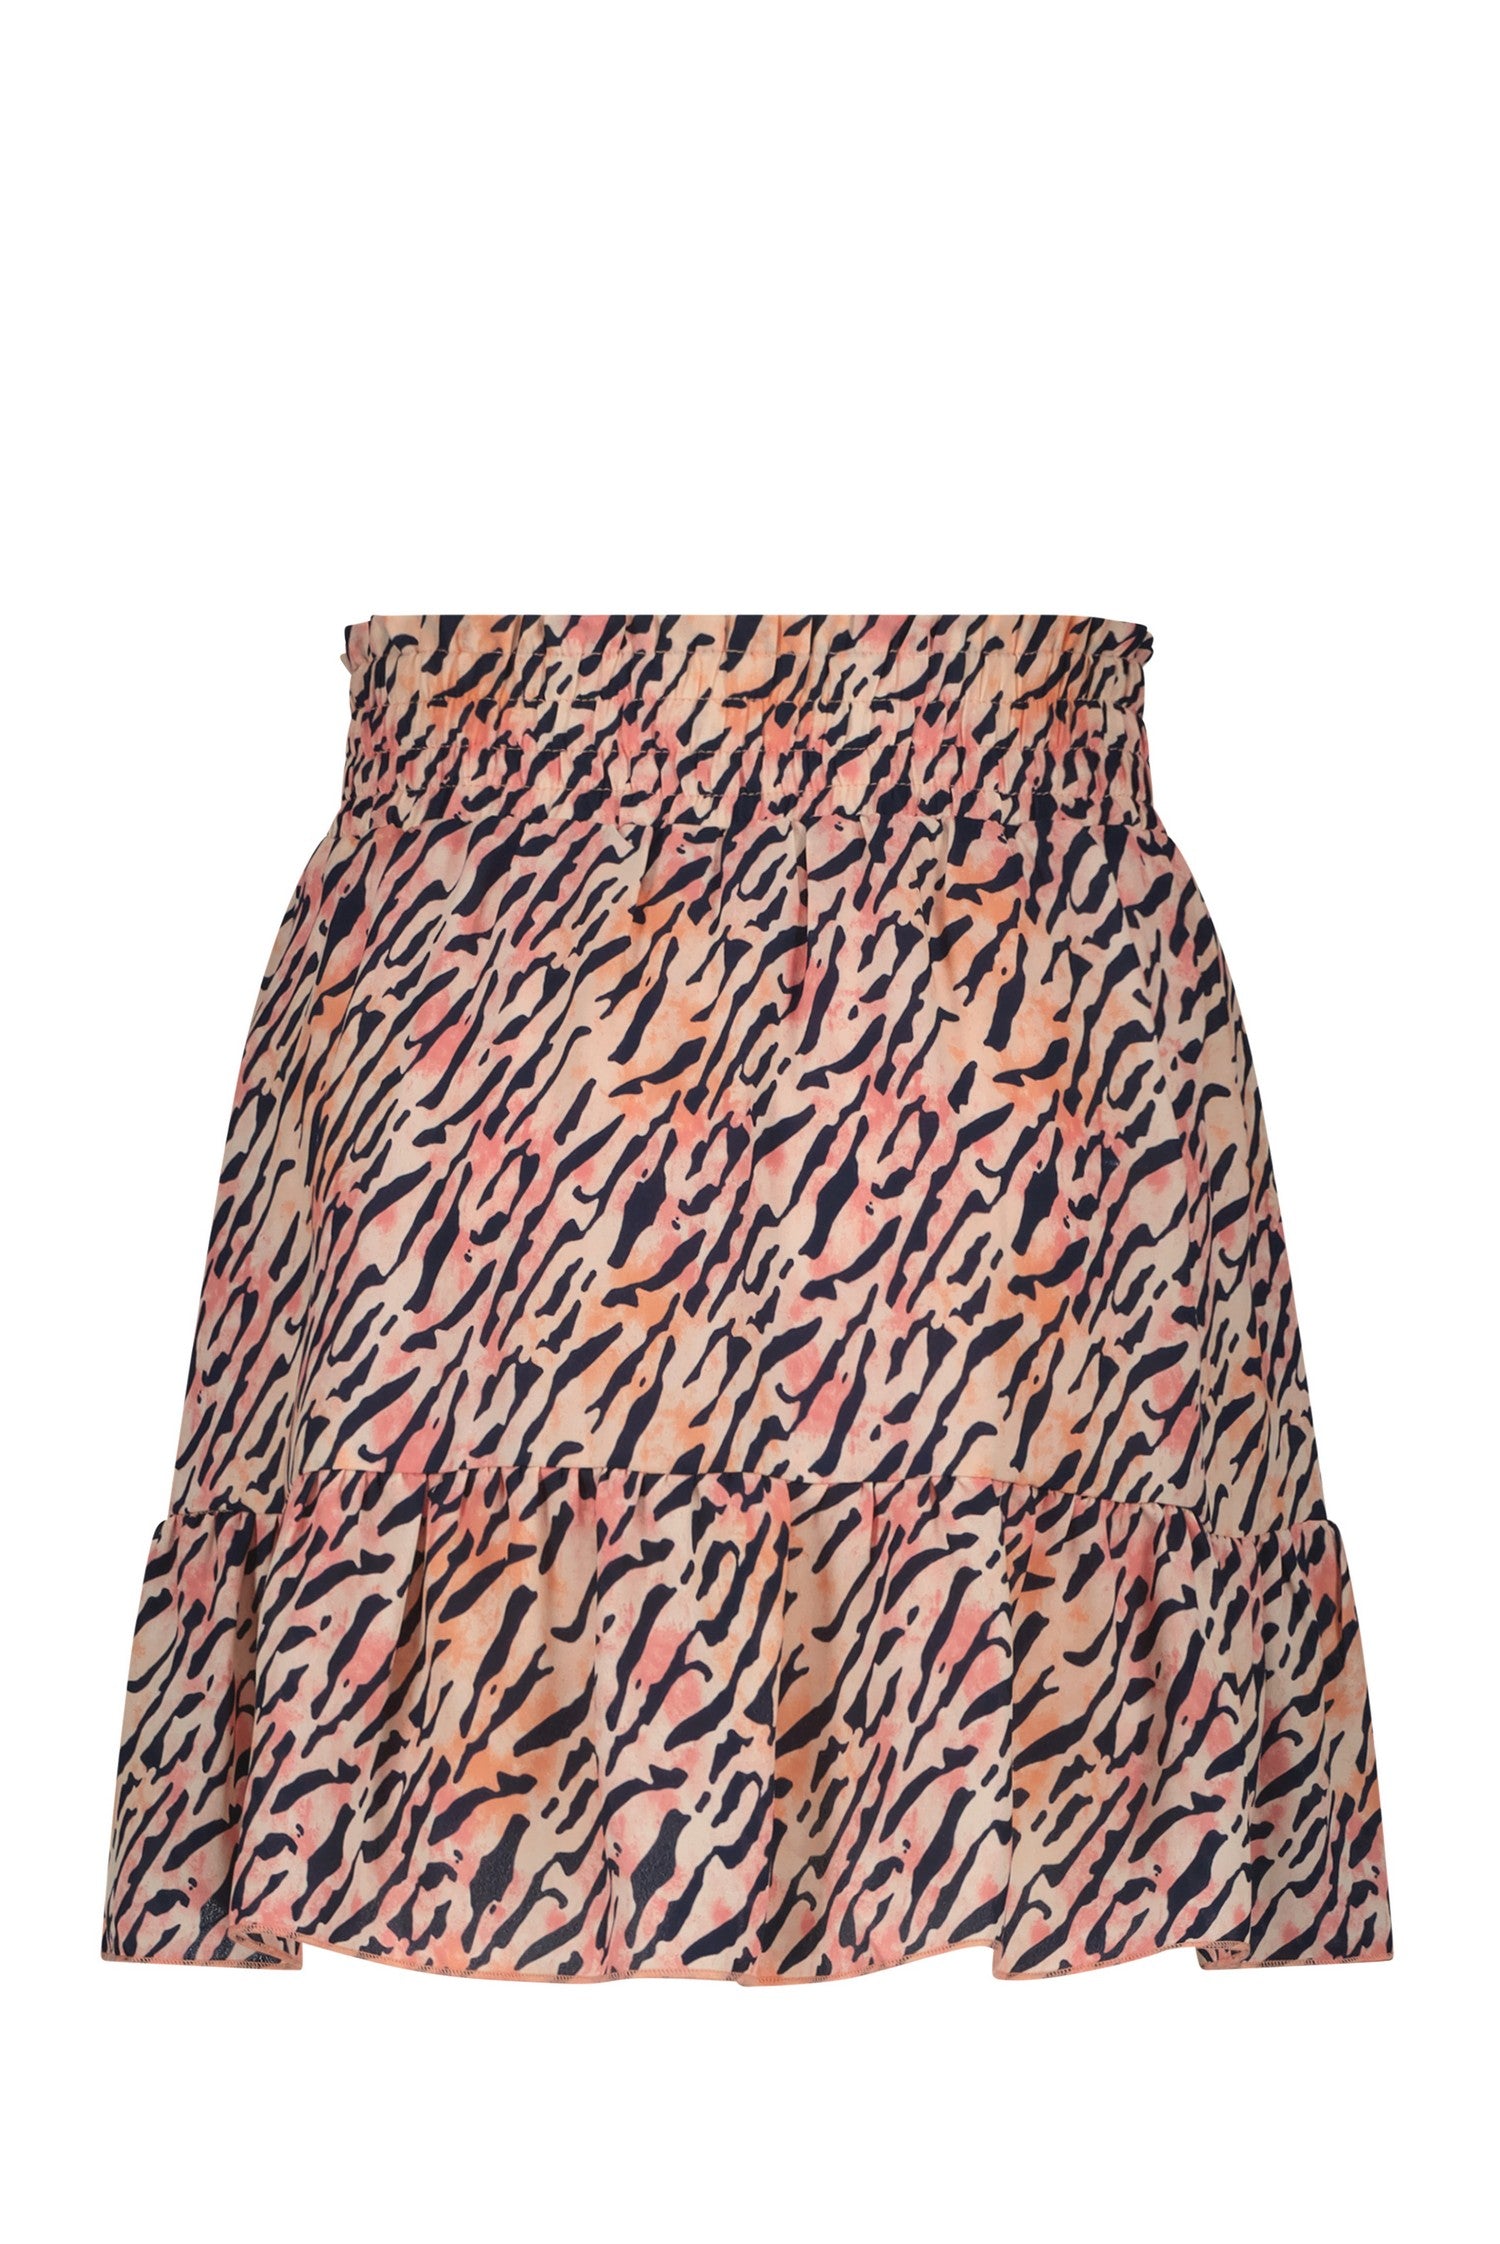 NoBell Nadia short skirt with pull up detail and short lining